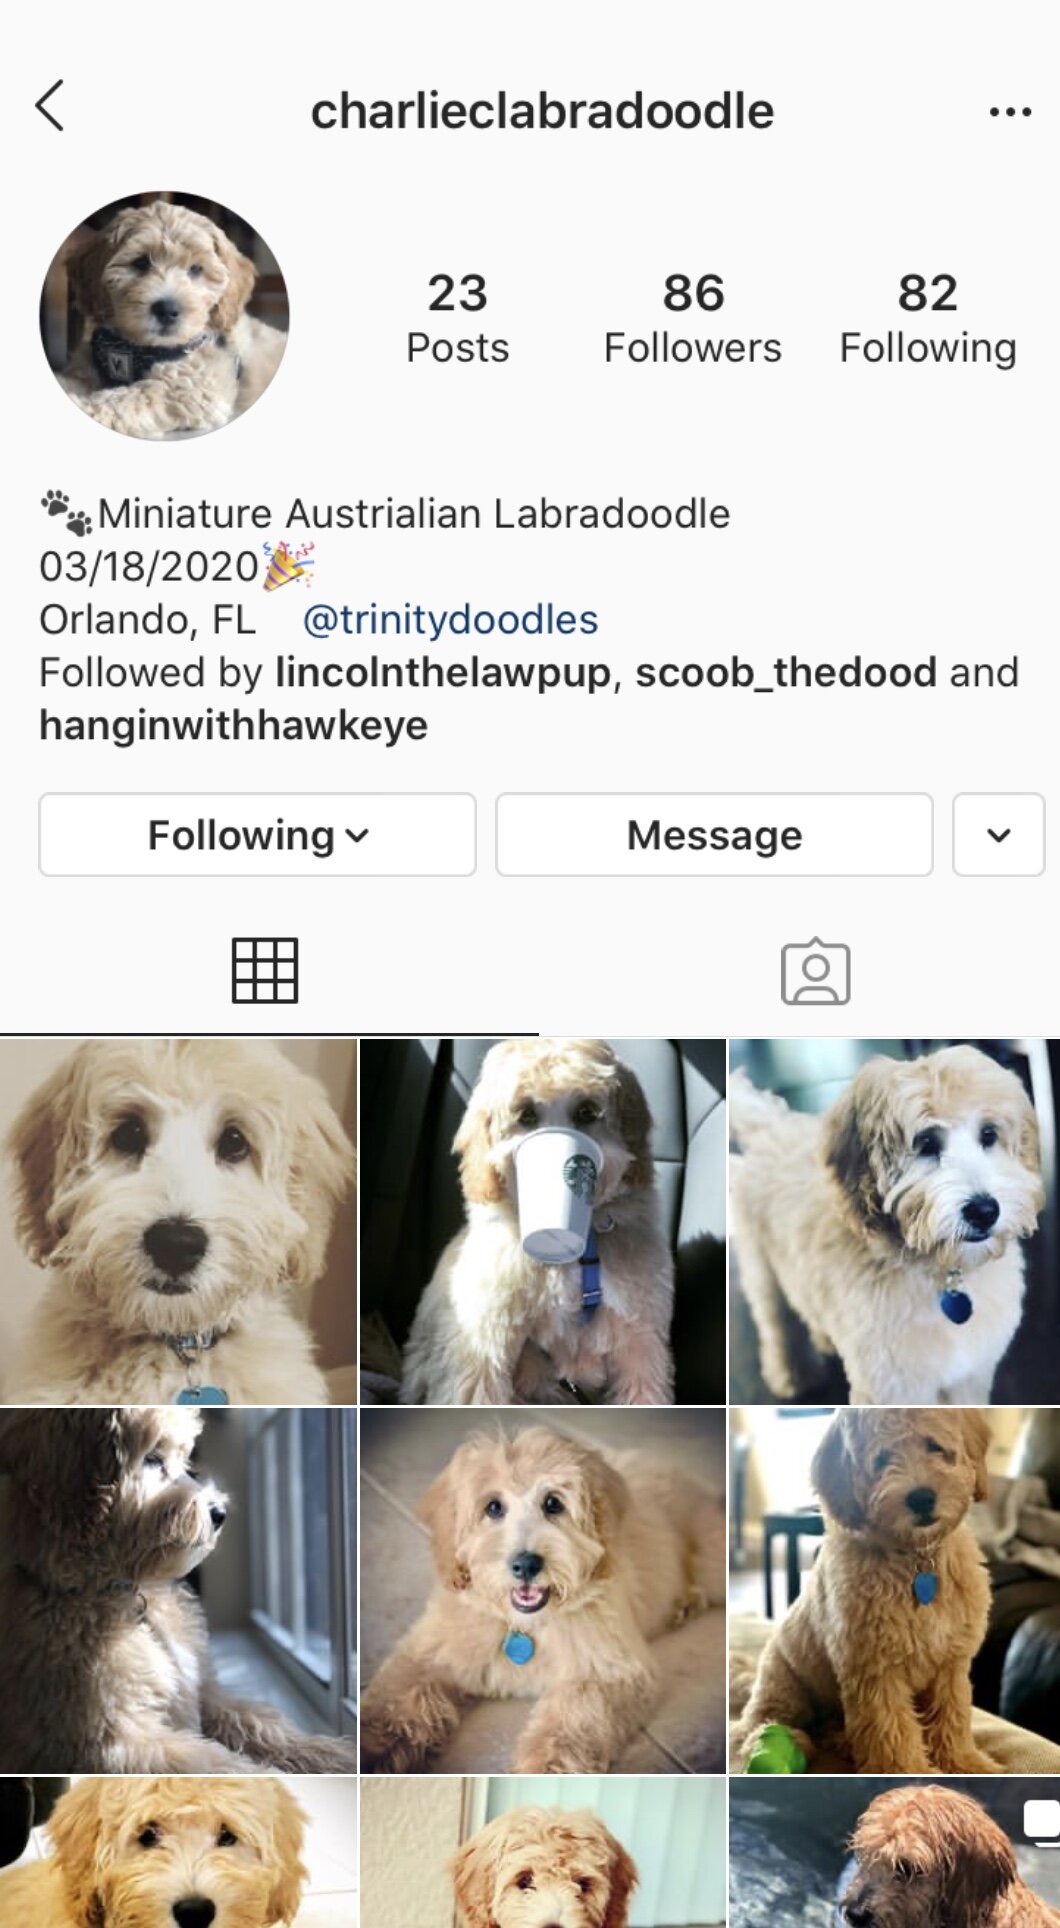 Tearribles (@tearribleinstincts) • Instagram photos and videos